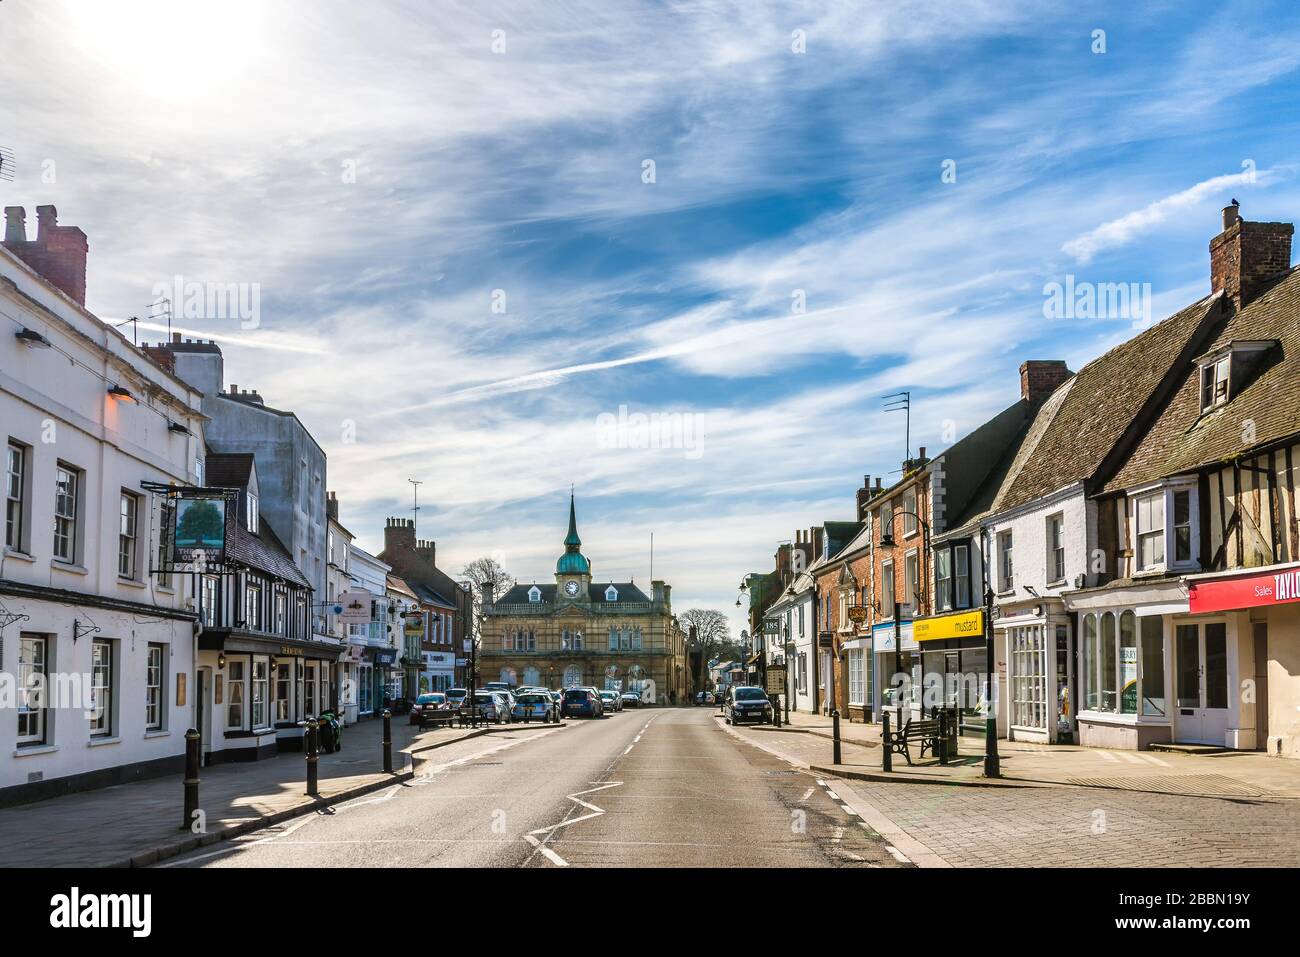 Market square and town hall, Towcester, Northamptonshire, England Stock Photo